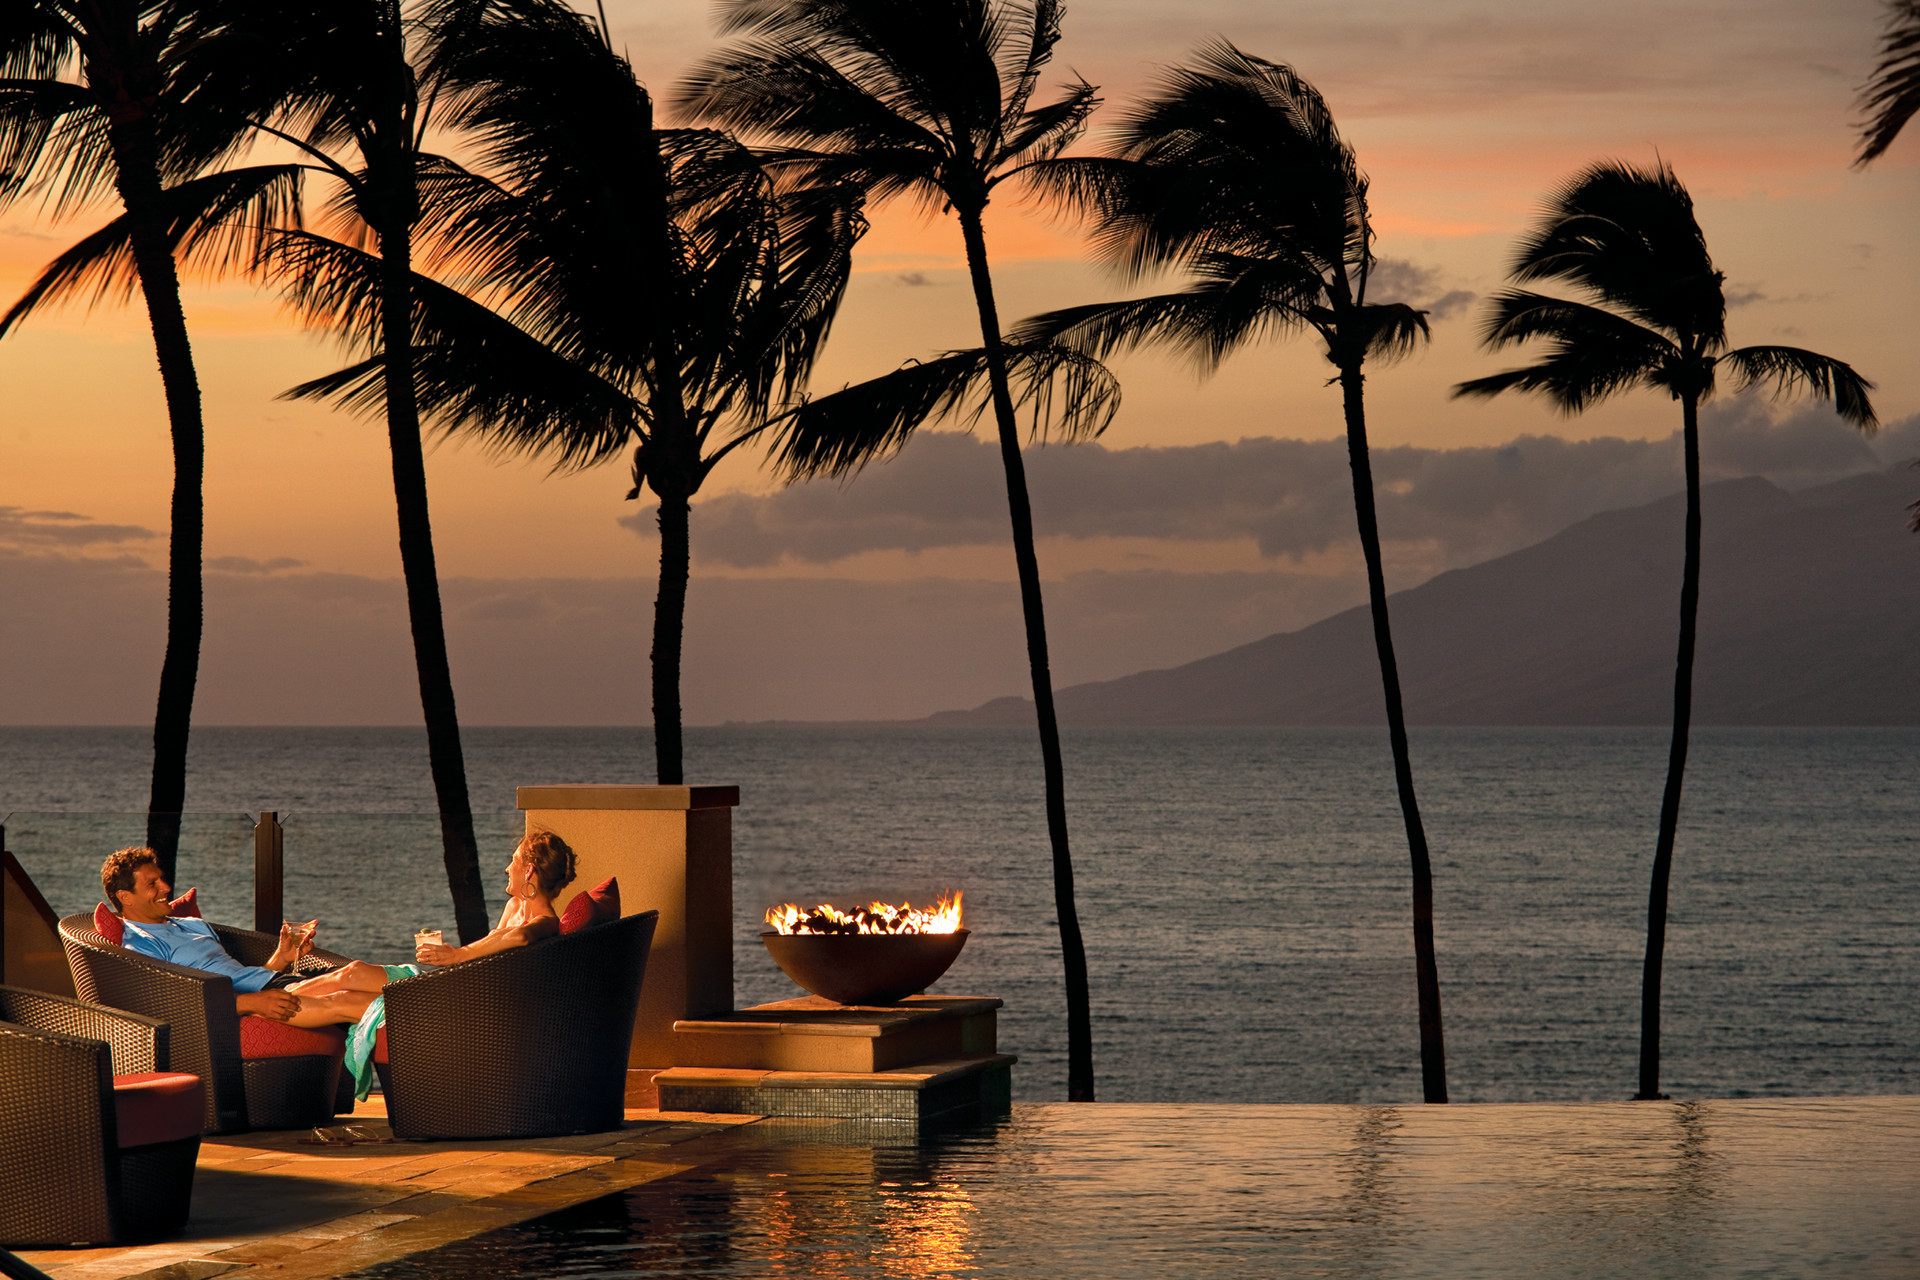 The Wailea Fantasy Tennis Camp's host hotel, Four Seasons Resort Maui, is situated fronting spectacular Wailea Beach